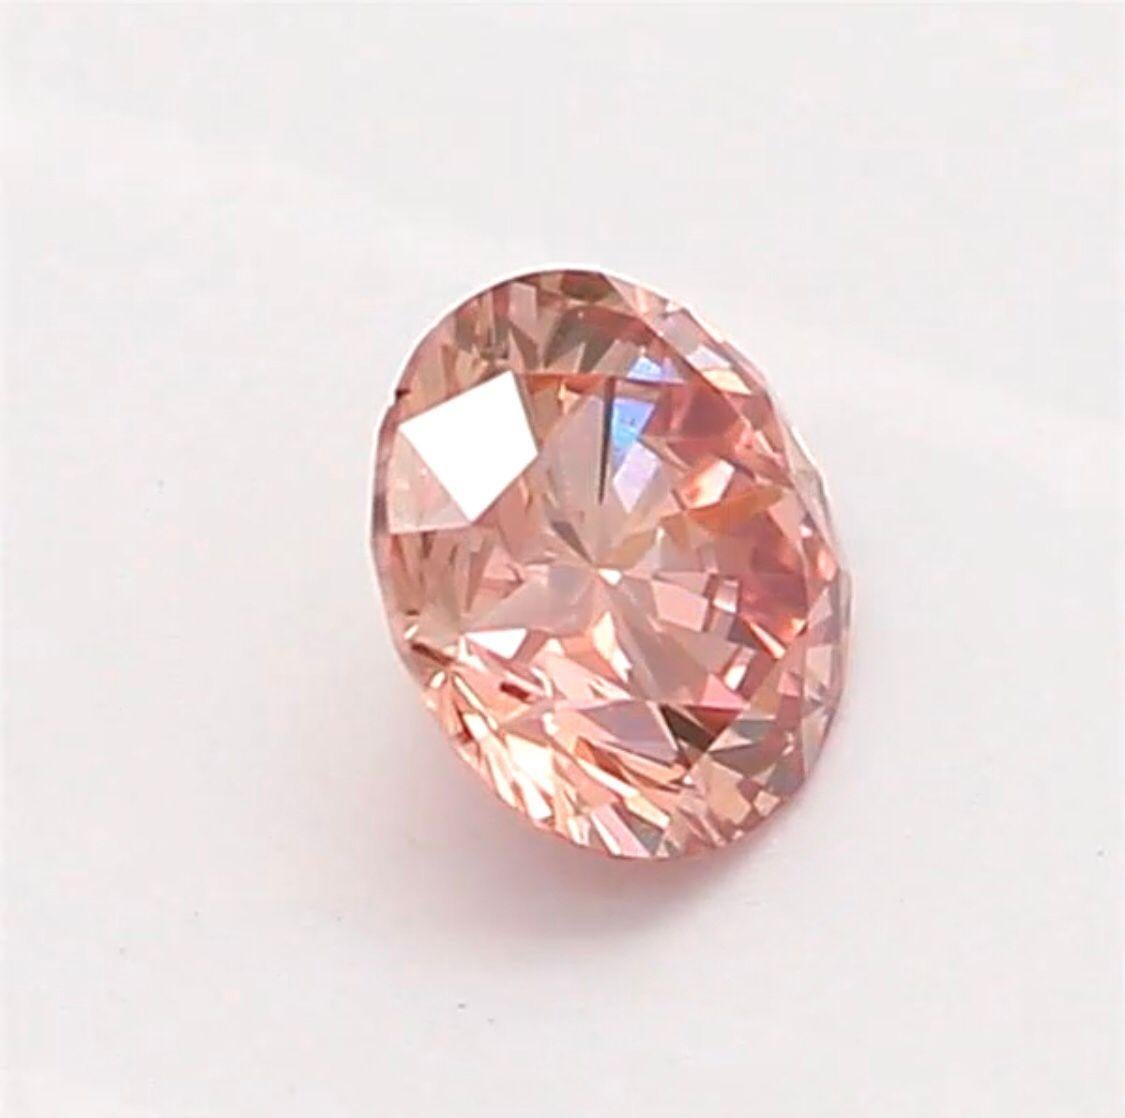 ***100% NATURAL FANCY COLOUR DIAMOND***

✪ Diamond Details ✪

➛ Shape: Round
➛ Colour Grade: Fancy Orangy Pink
➛ Carat: 0.15
➛ Clarity: SI2
➛ CGL Certified 

^FEATURES OF THE DIAMOND^

Our 0.15 carat fancy orangy-pink diamond is a relatively small